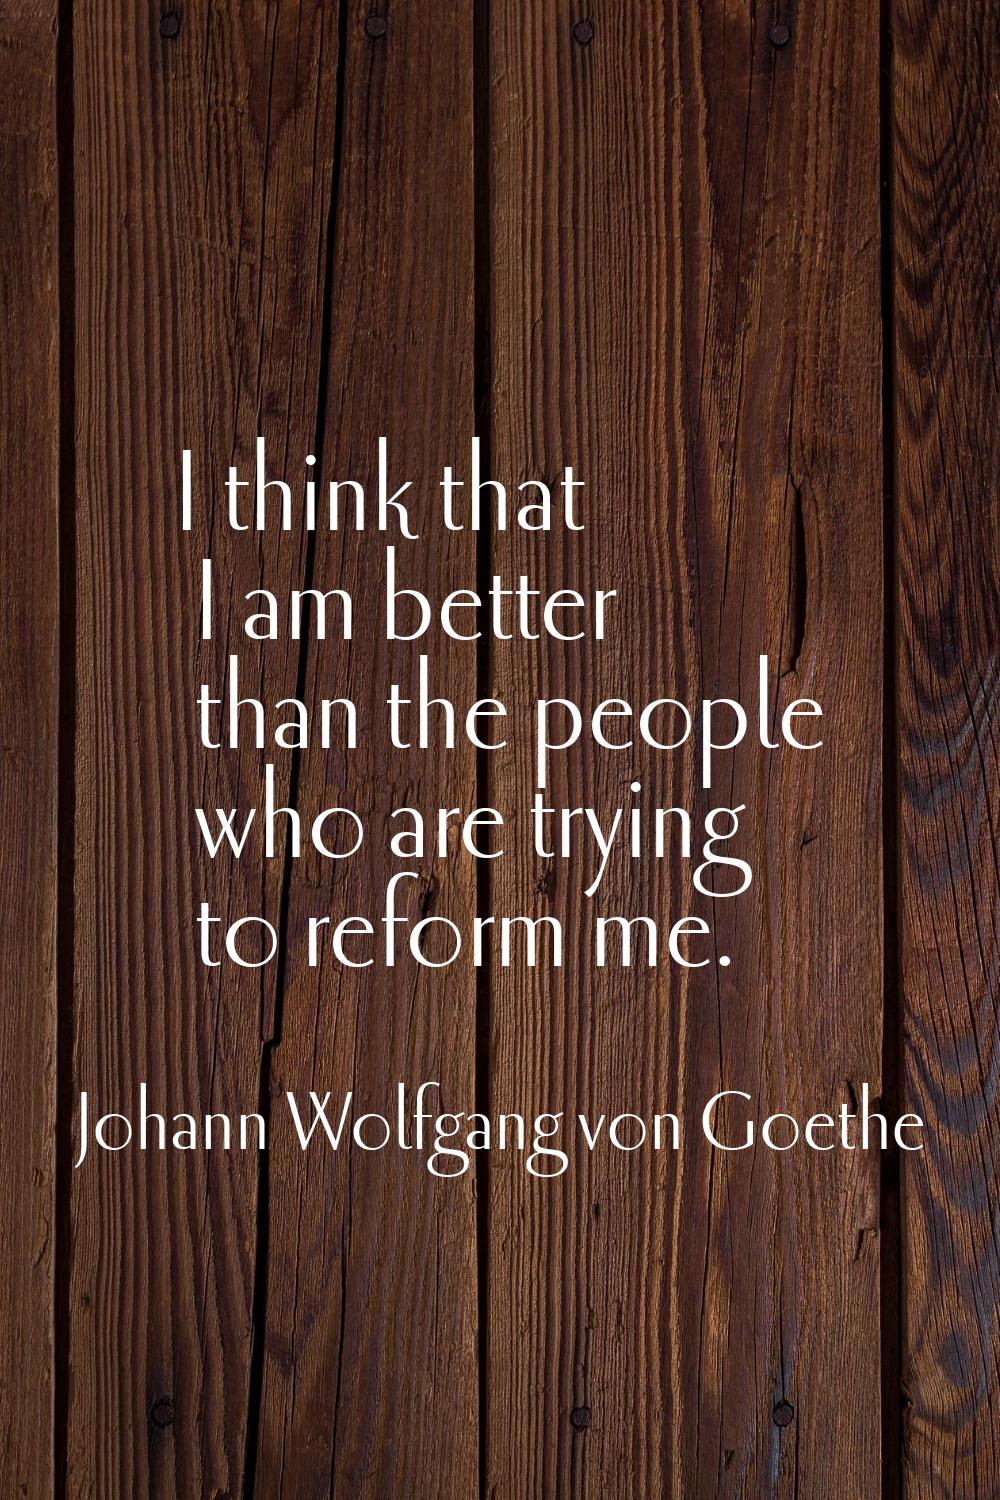 I think that I am better than the people who are trying to reform me.